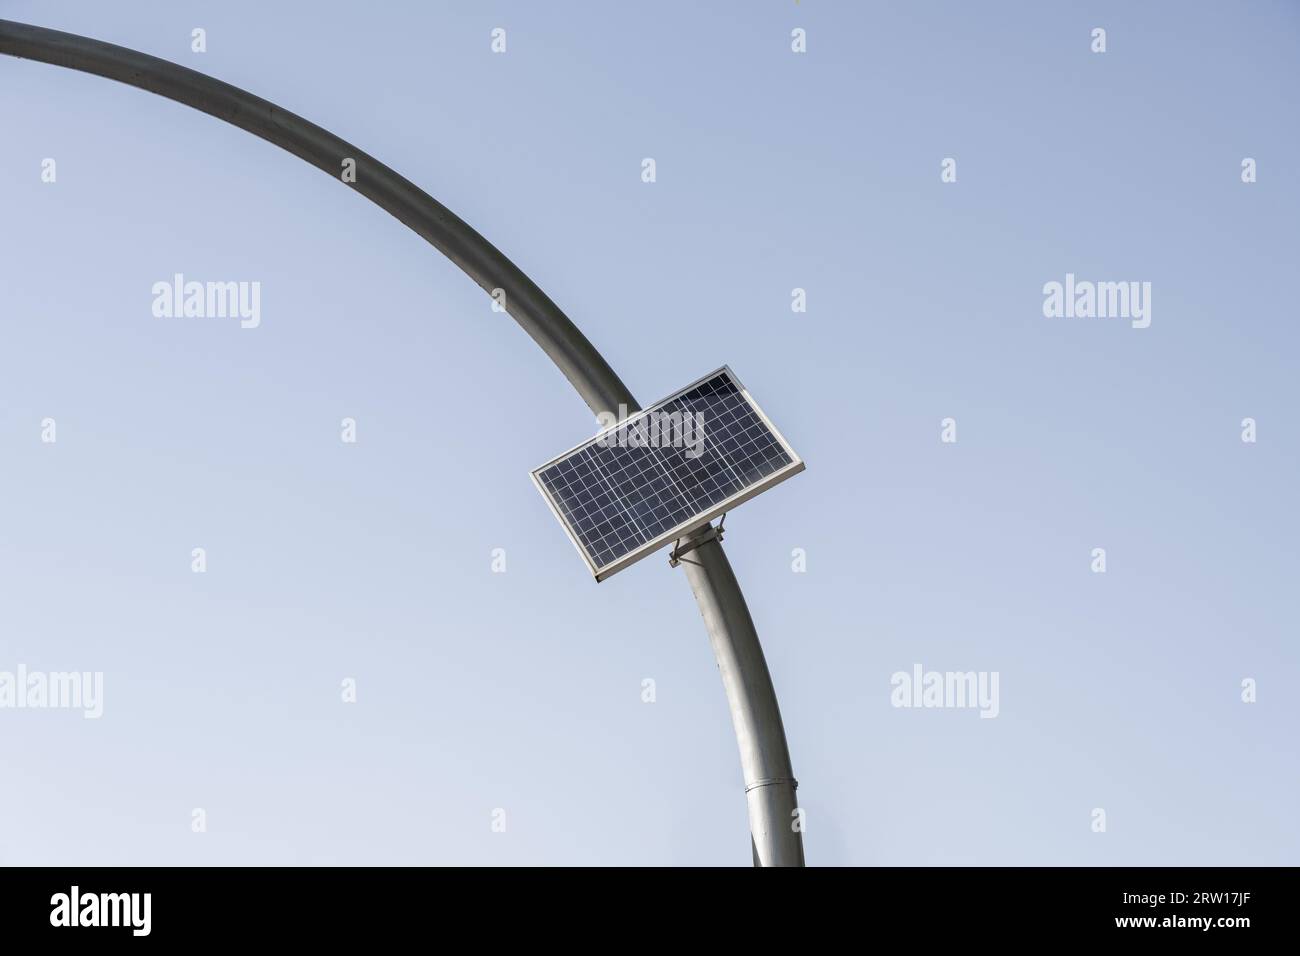 A photoelectric cell charging device on a curved metal pole Stock Photo